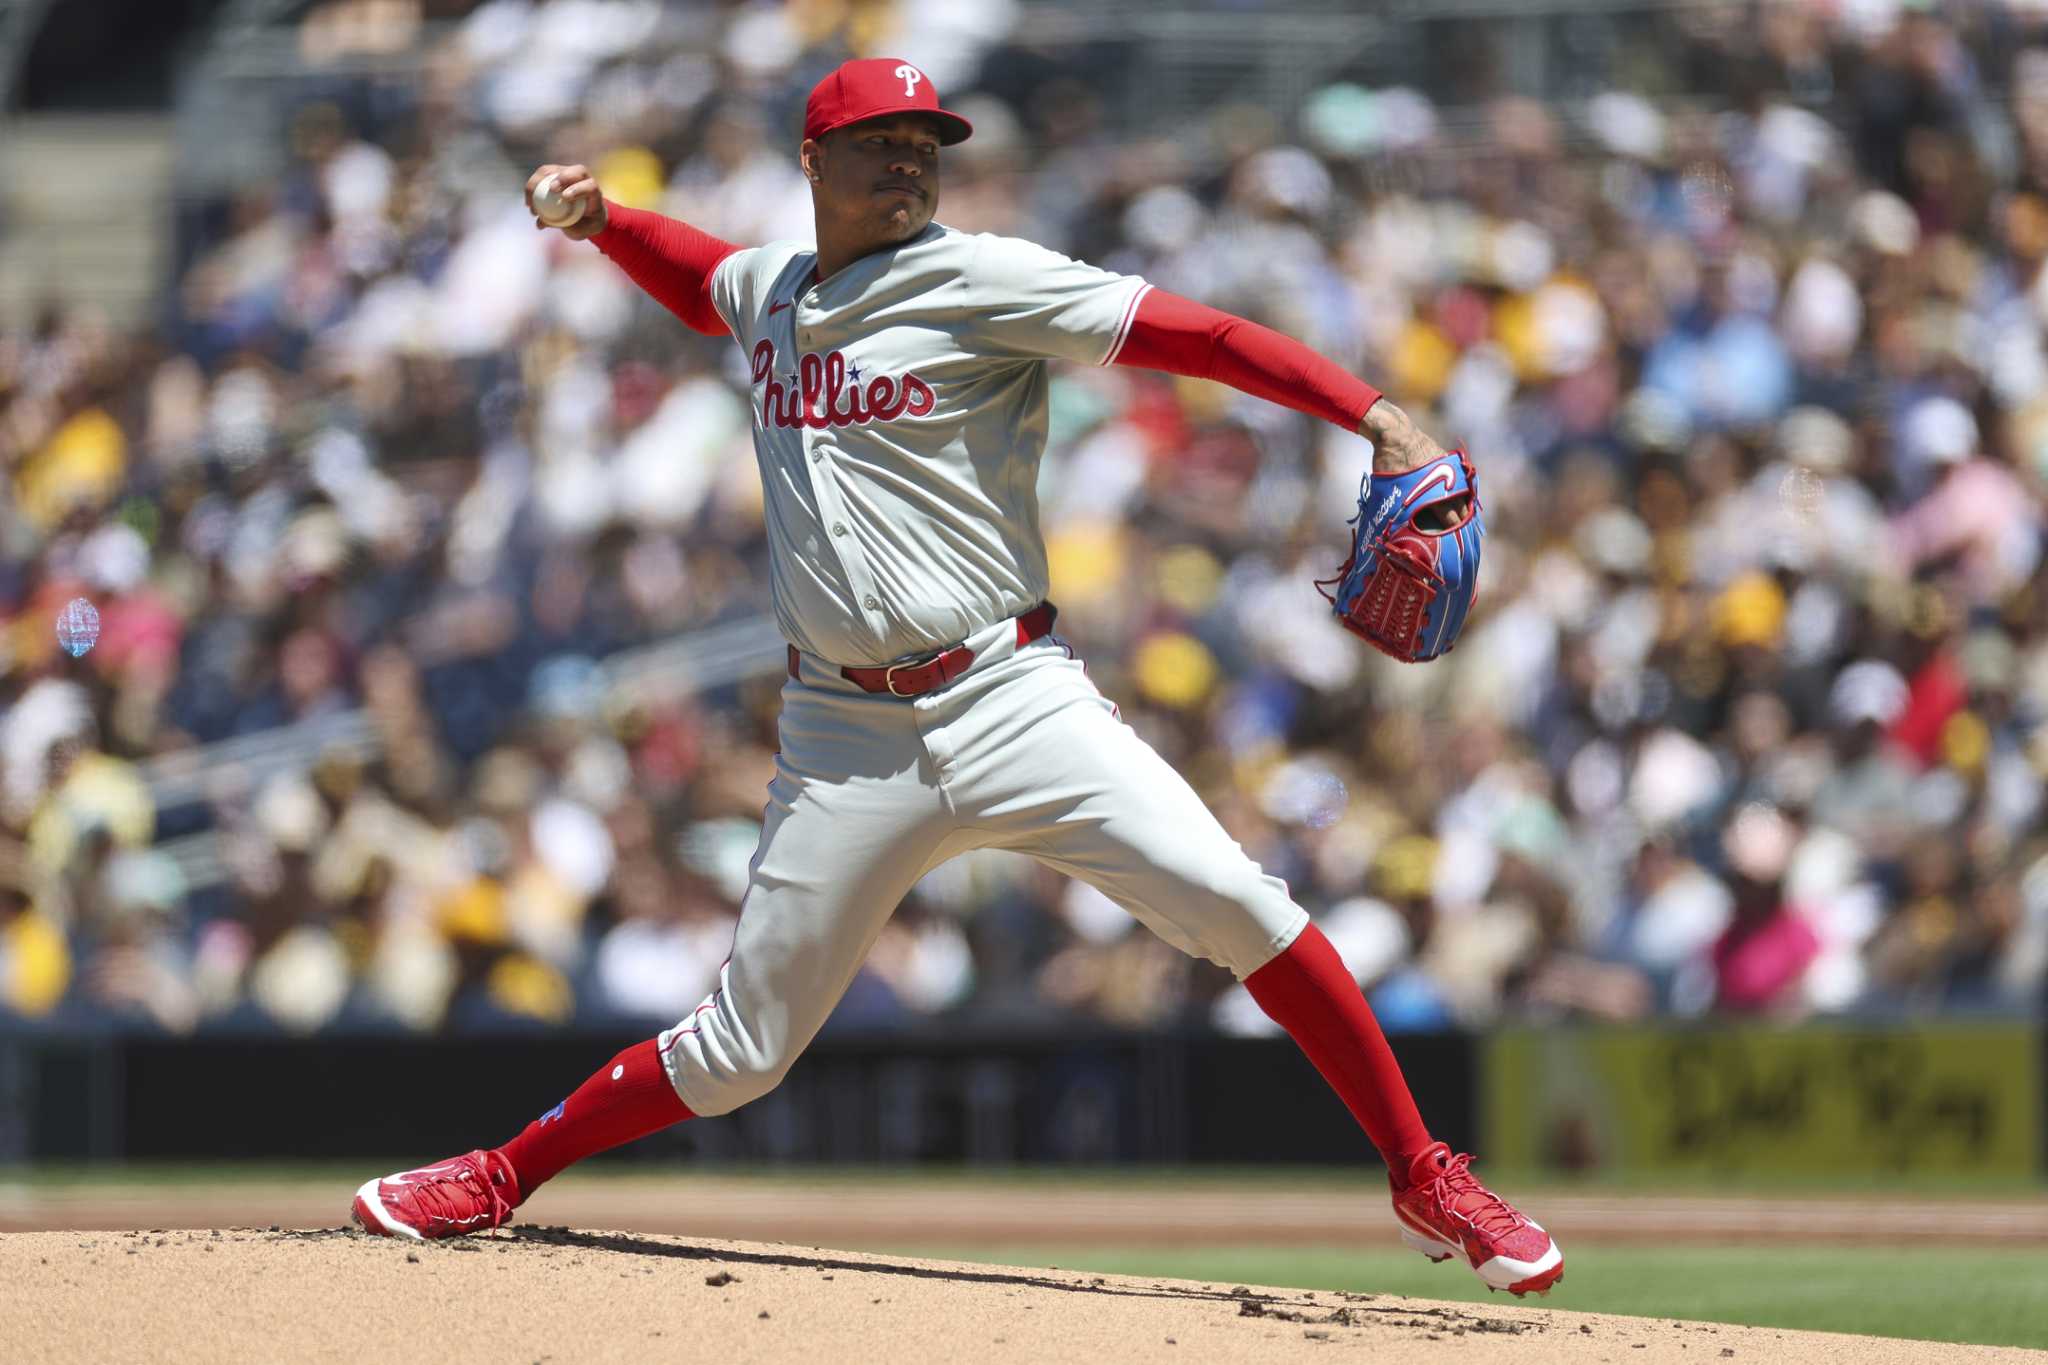 Stott and Realmuto homer, Walker makes a slick play as the Phillies win 8-6 to sweep the Padres